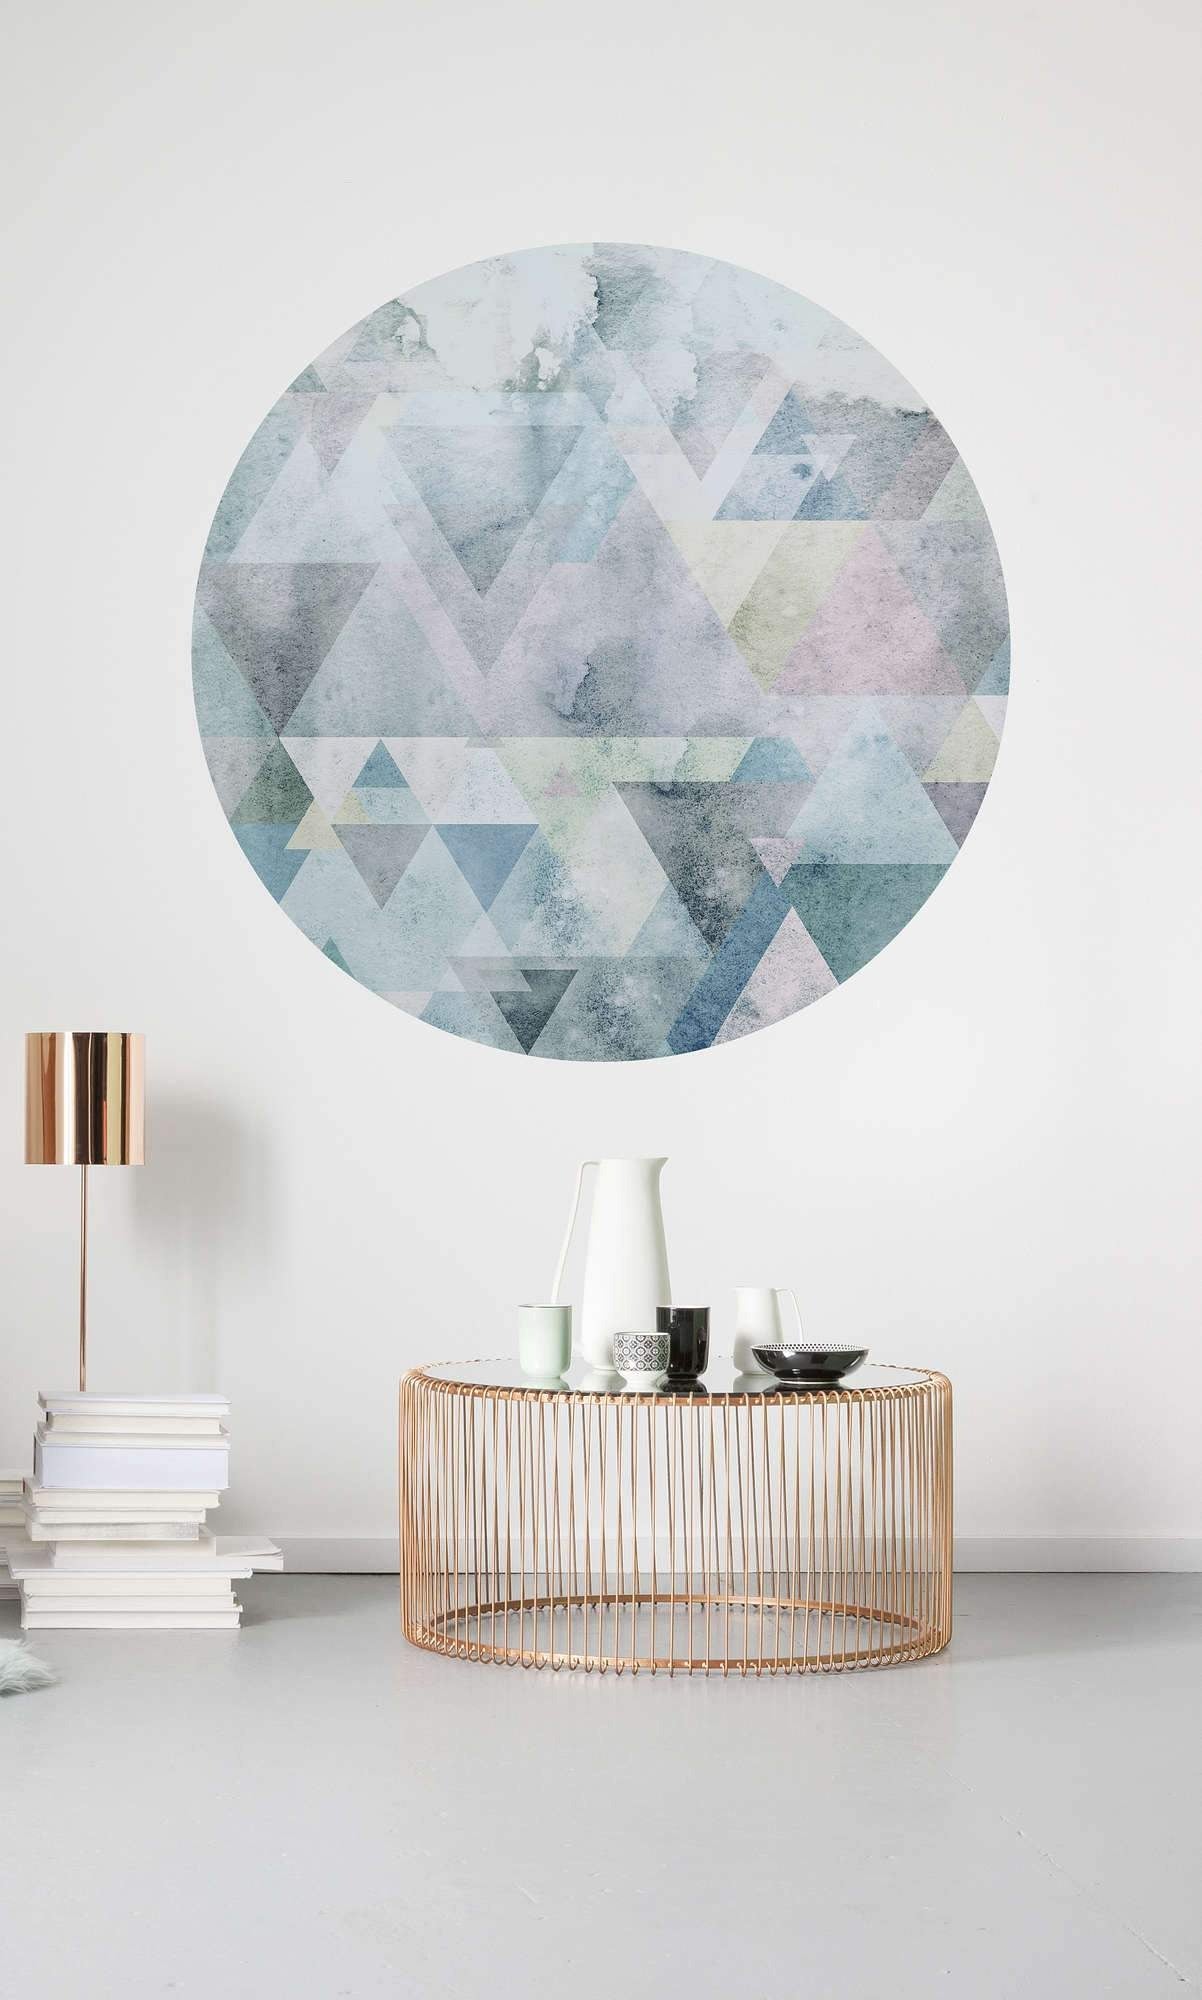 Cerulean Prisms Circle Wall Art (Self-Adhesive)-Wall Decor-ABSTRACT WALLPAPERS, ART WALLPAPER, CIRCLE WALL ART, ECO MURALS, NATURE WALL ART, PATTERN WALLPAPERS, SUSTAINABLE DECOR-Forest Homes-Nature inspired decor-Nature decor